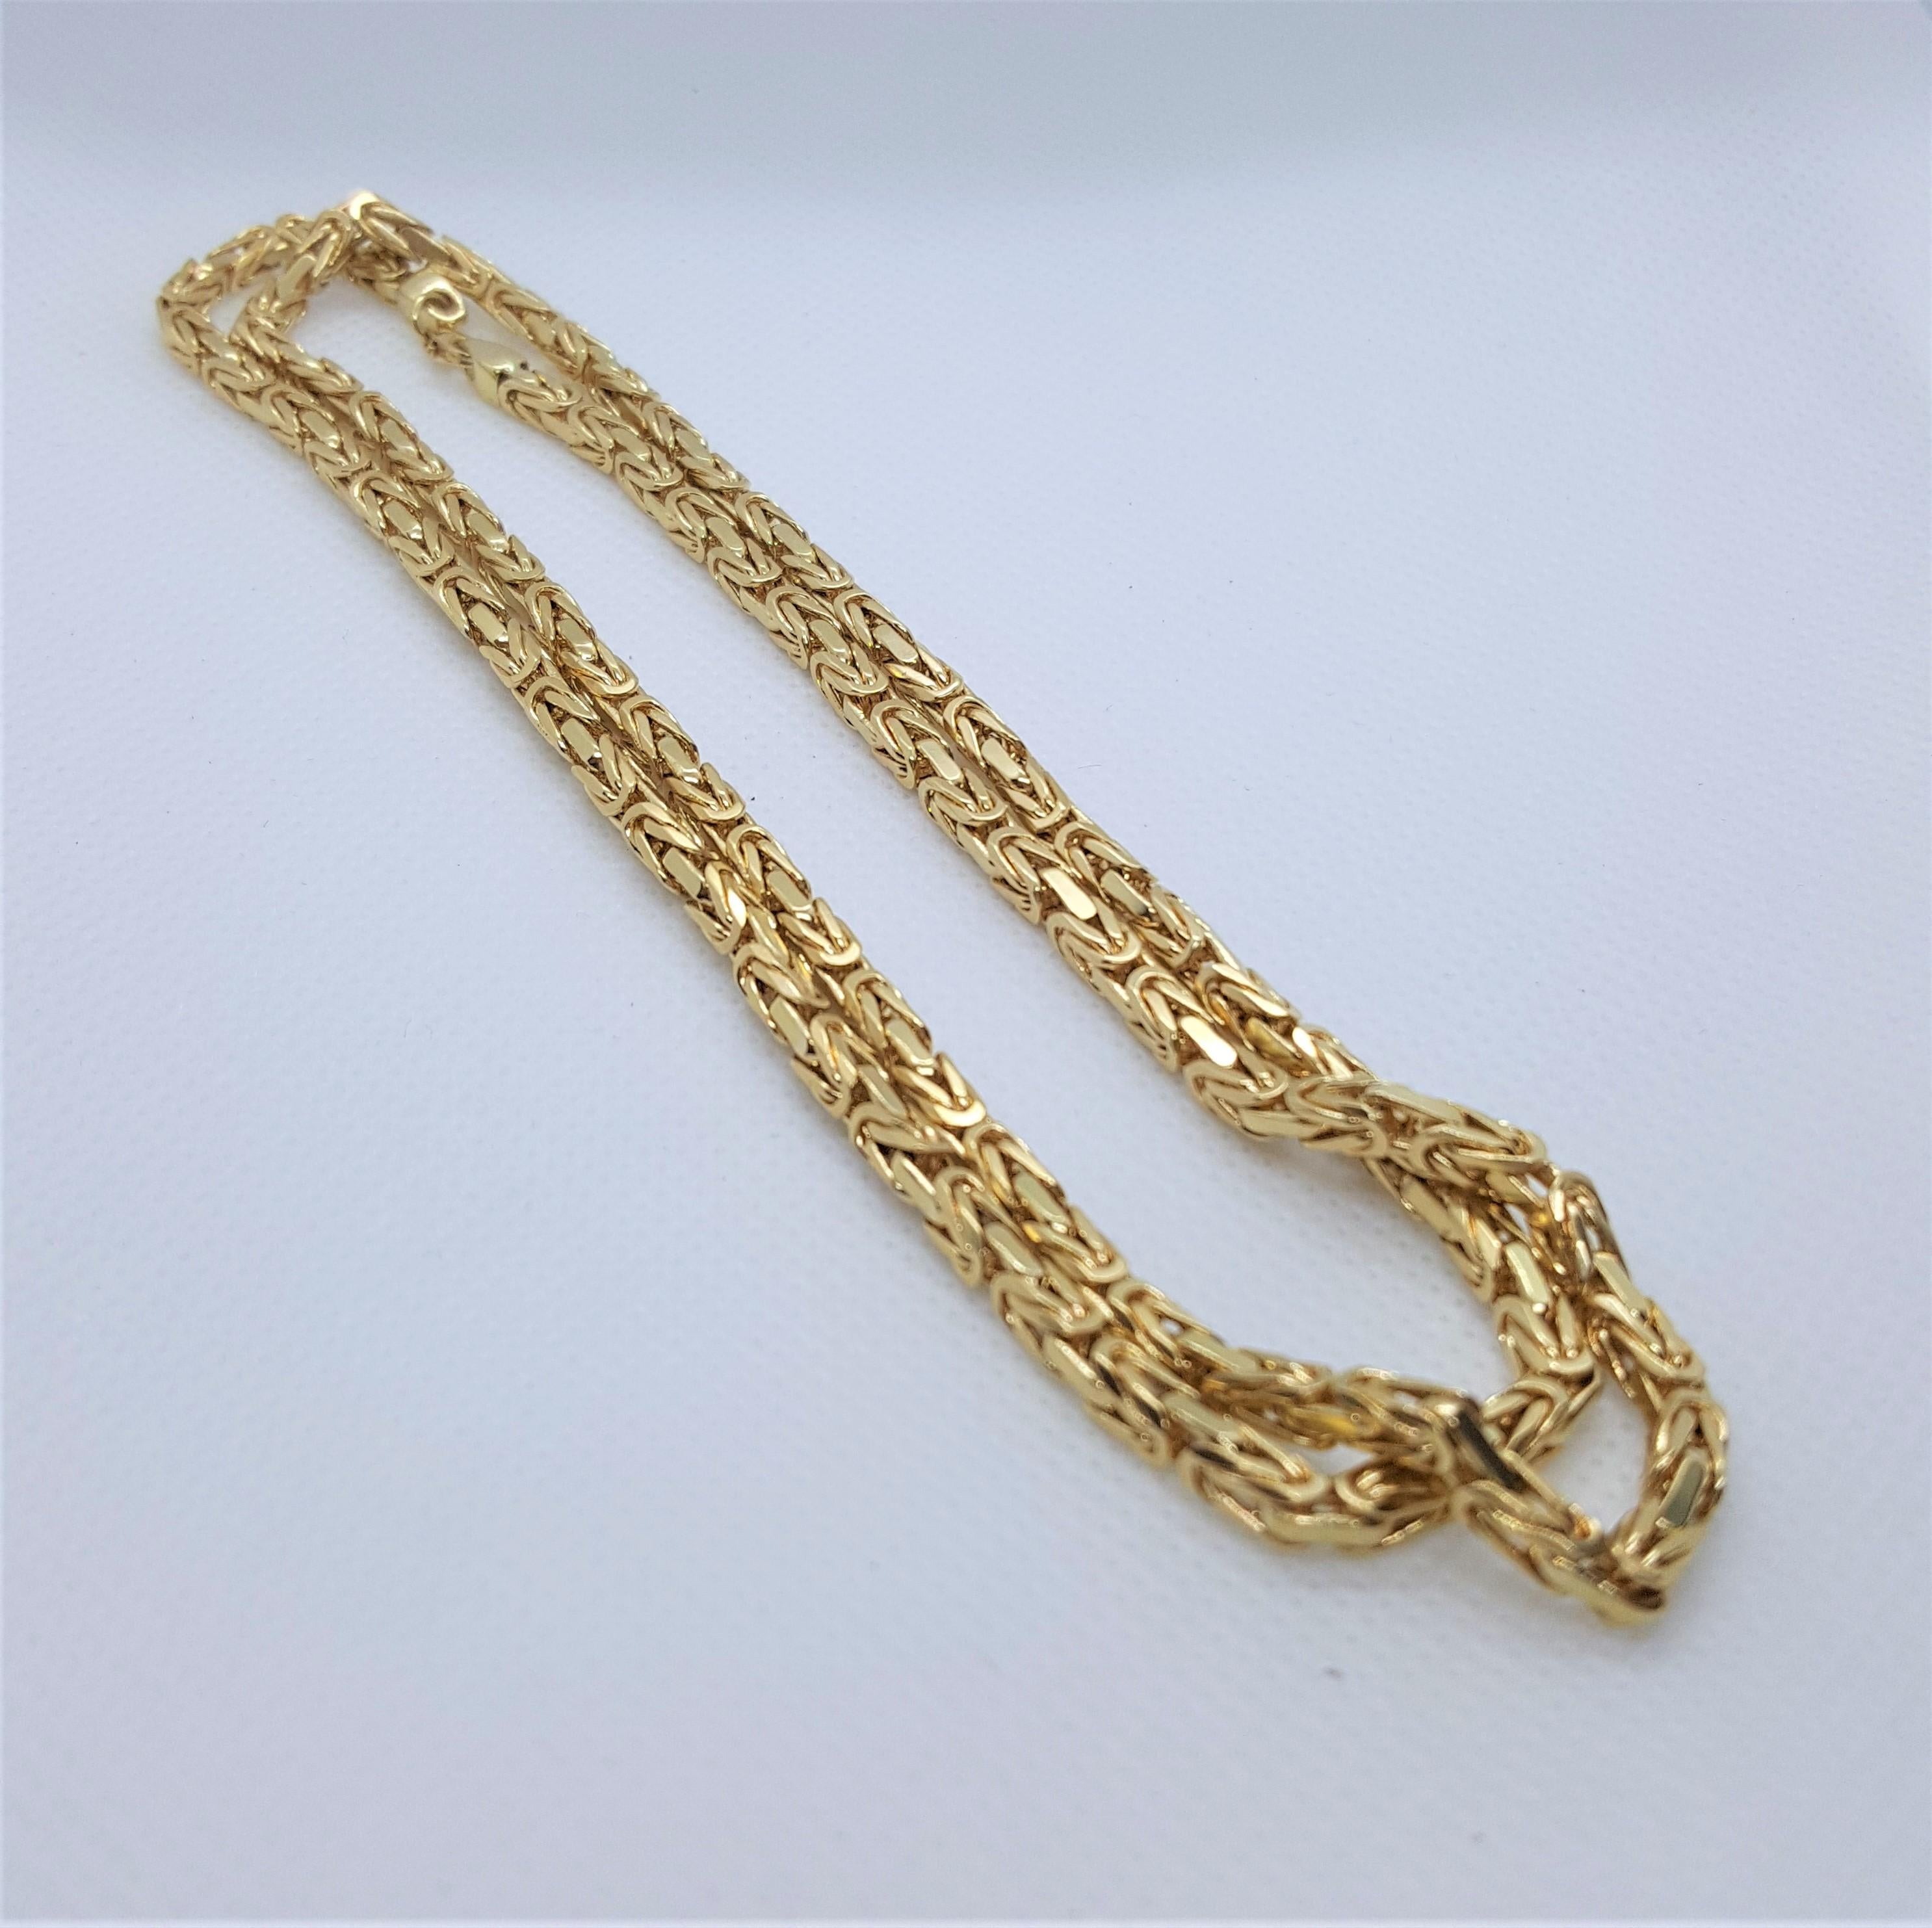 A well-made 26-inch byzantine link chain that's 18kt yellow gold, 3.1mm square, stamped 750 18K and weighs 56.6 grams, and secured with a lobster clasp, and the links are solid. This chain is in very nice condition. It's pictured on a woman;